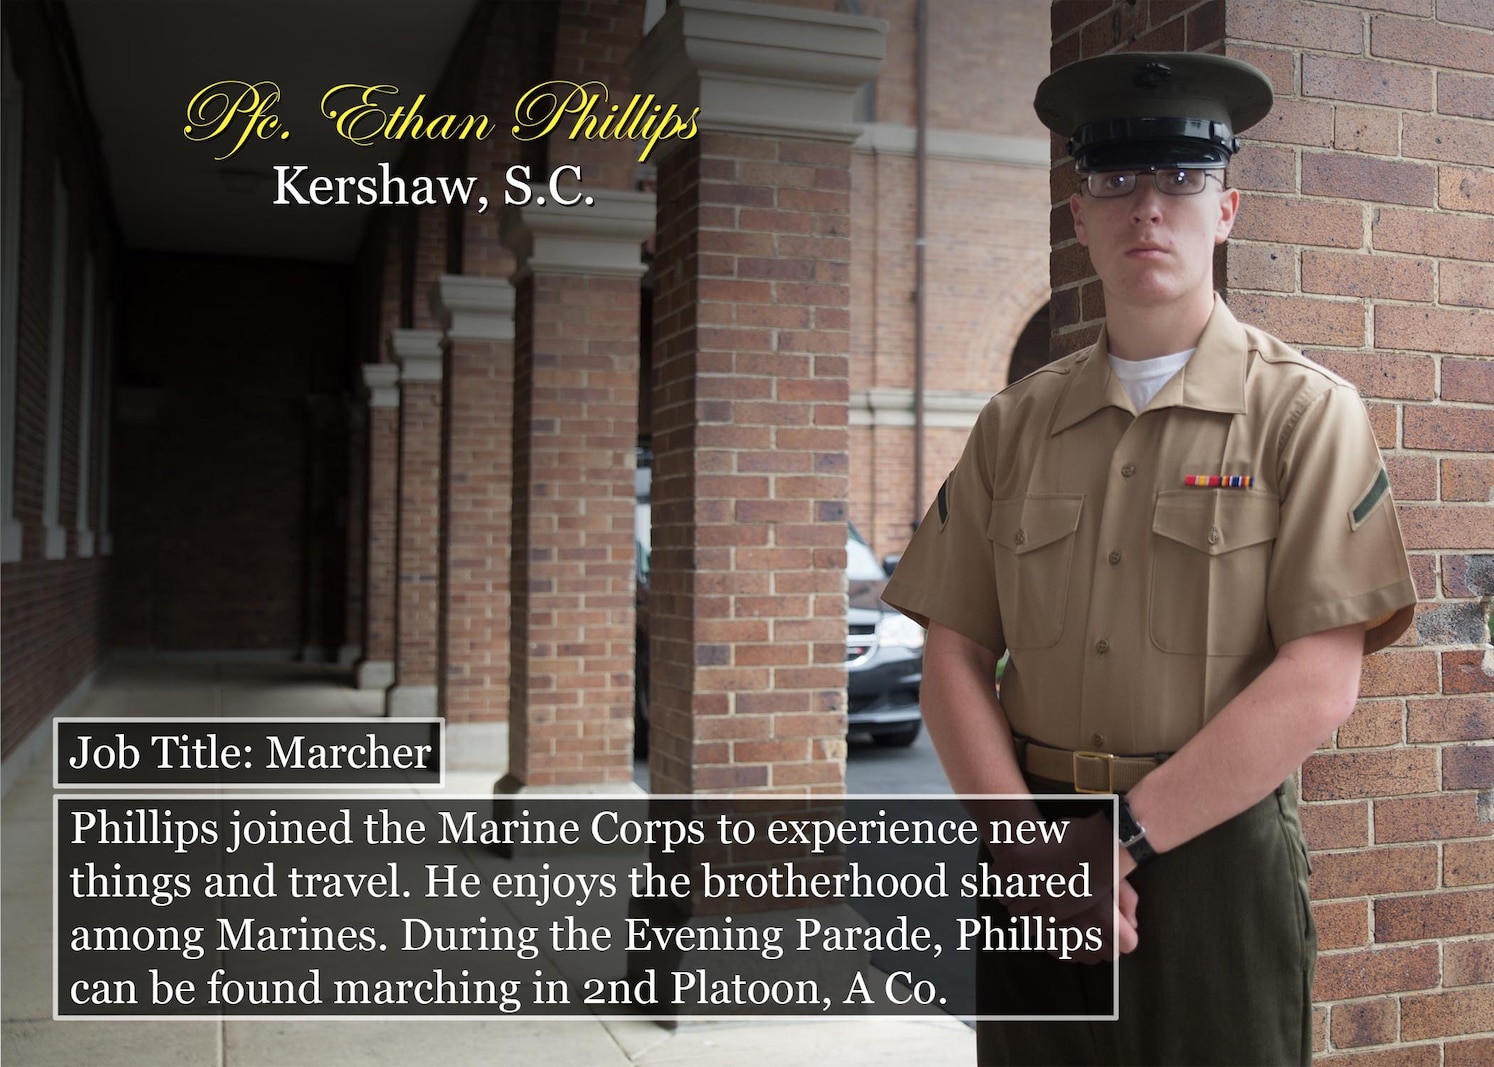 Pfc. Ethan Phillips
Kershaw, S.C.
Job Title: Marcher
Phillips joined the Marine Corps to experience new things and travel. He enjoys the brotherhood shared among Marines. During the Evening Parade, Phillips can be found marching in 2nd Platoon, A Co.
(Official Marine Corps graphic by Cpl. Chi Nguyen/Released)